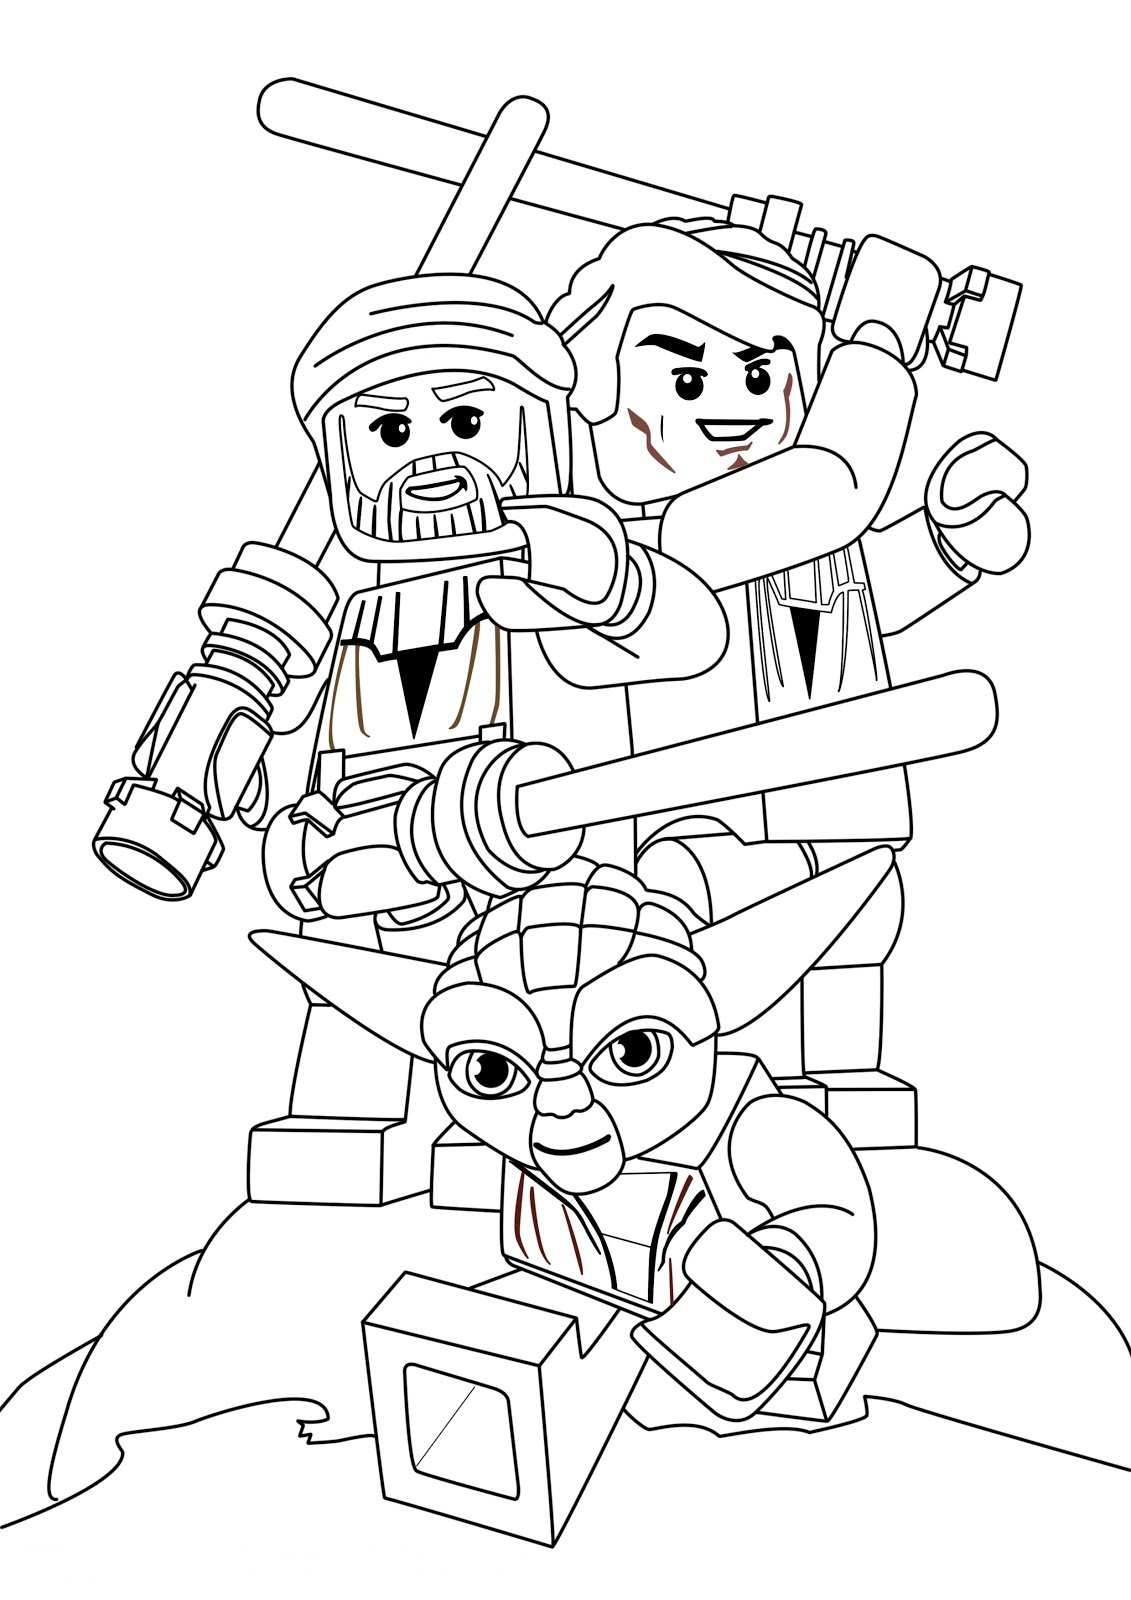 Lego Coloring Pages Star Wars Star Wars Coloring Pages Free Printable Star Wars Coloring Pages